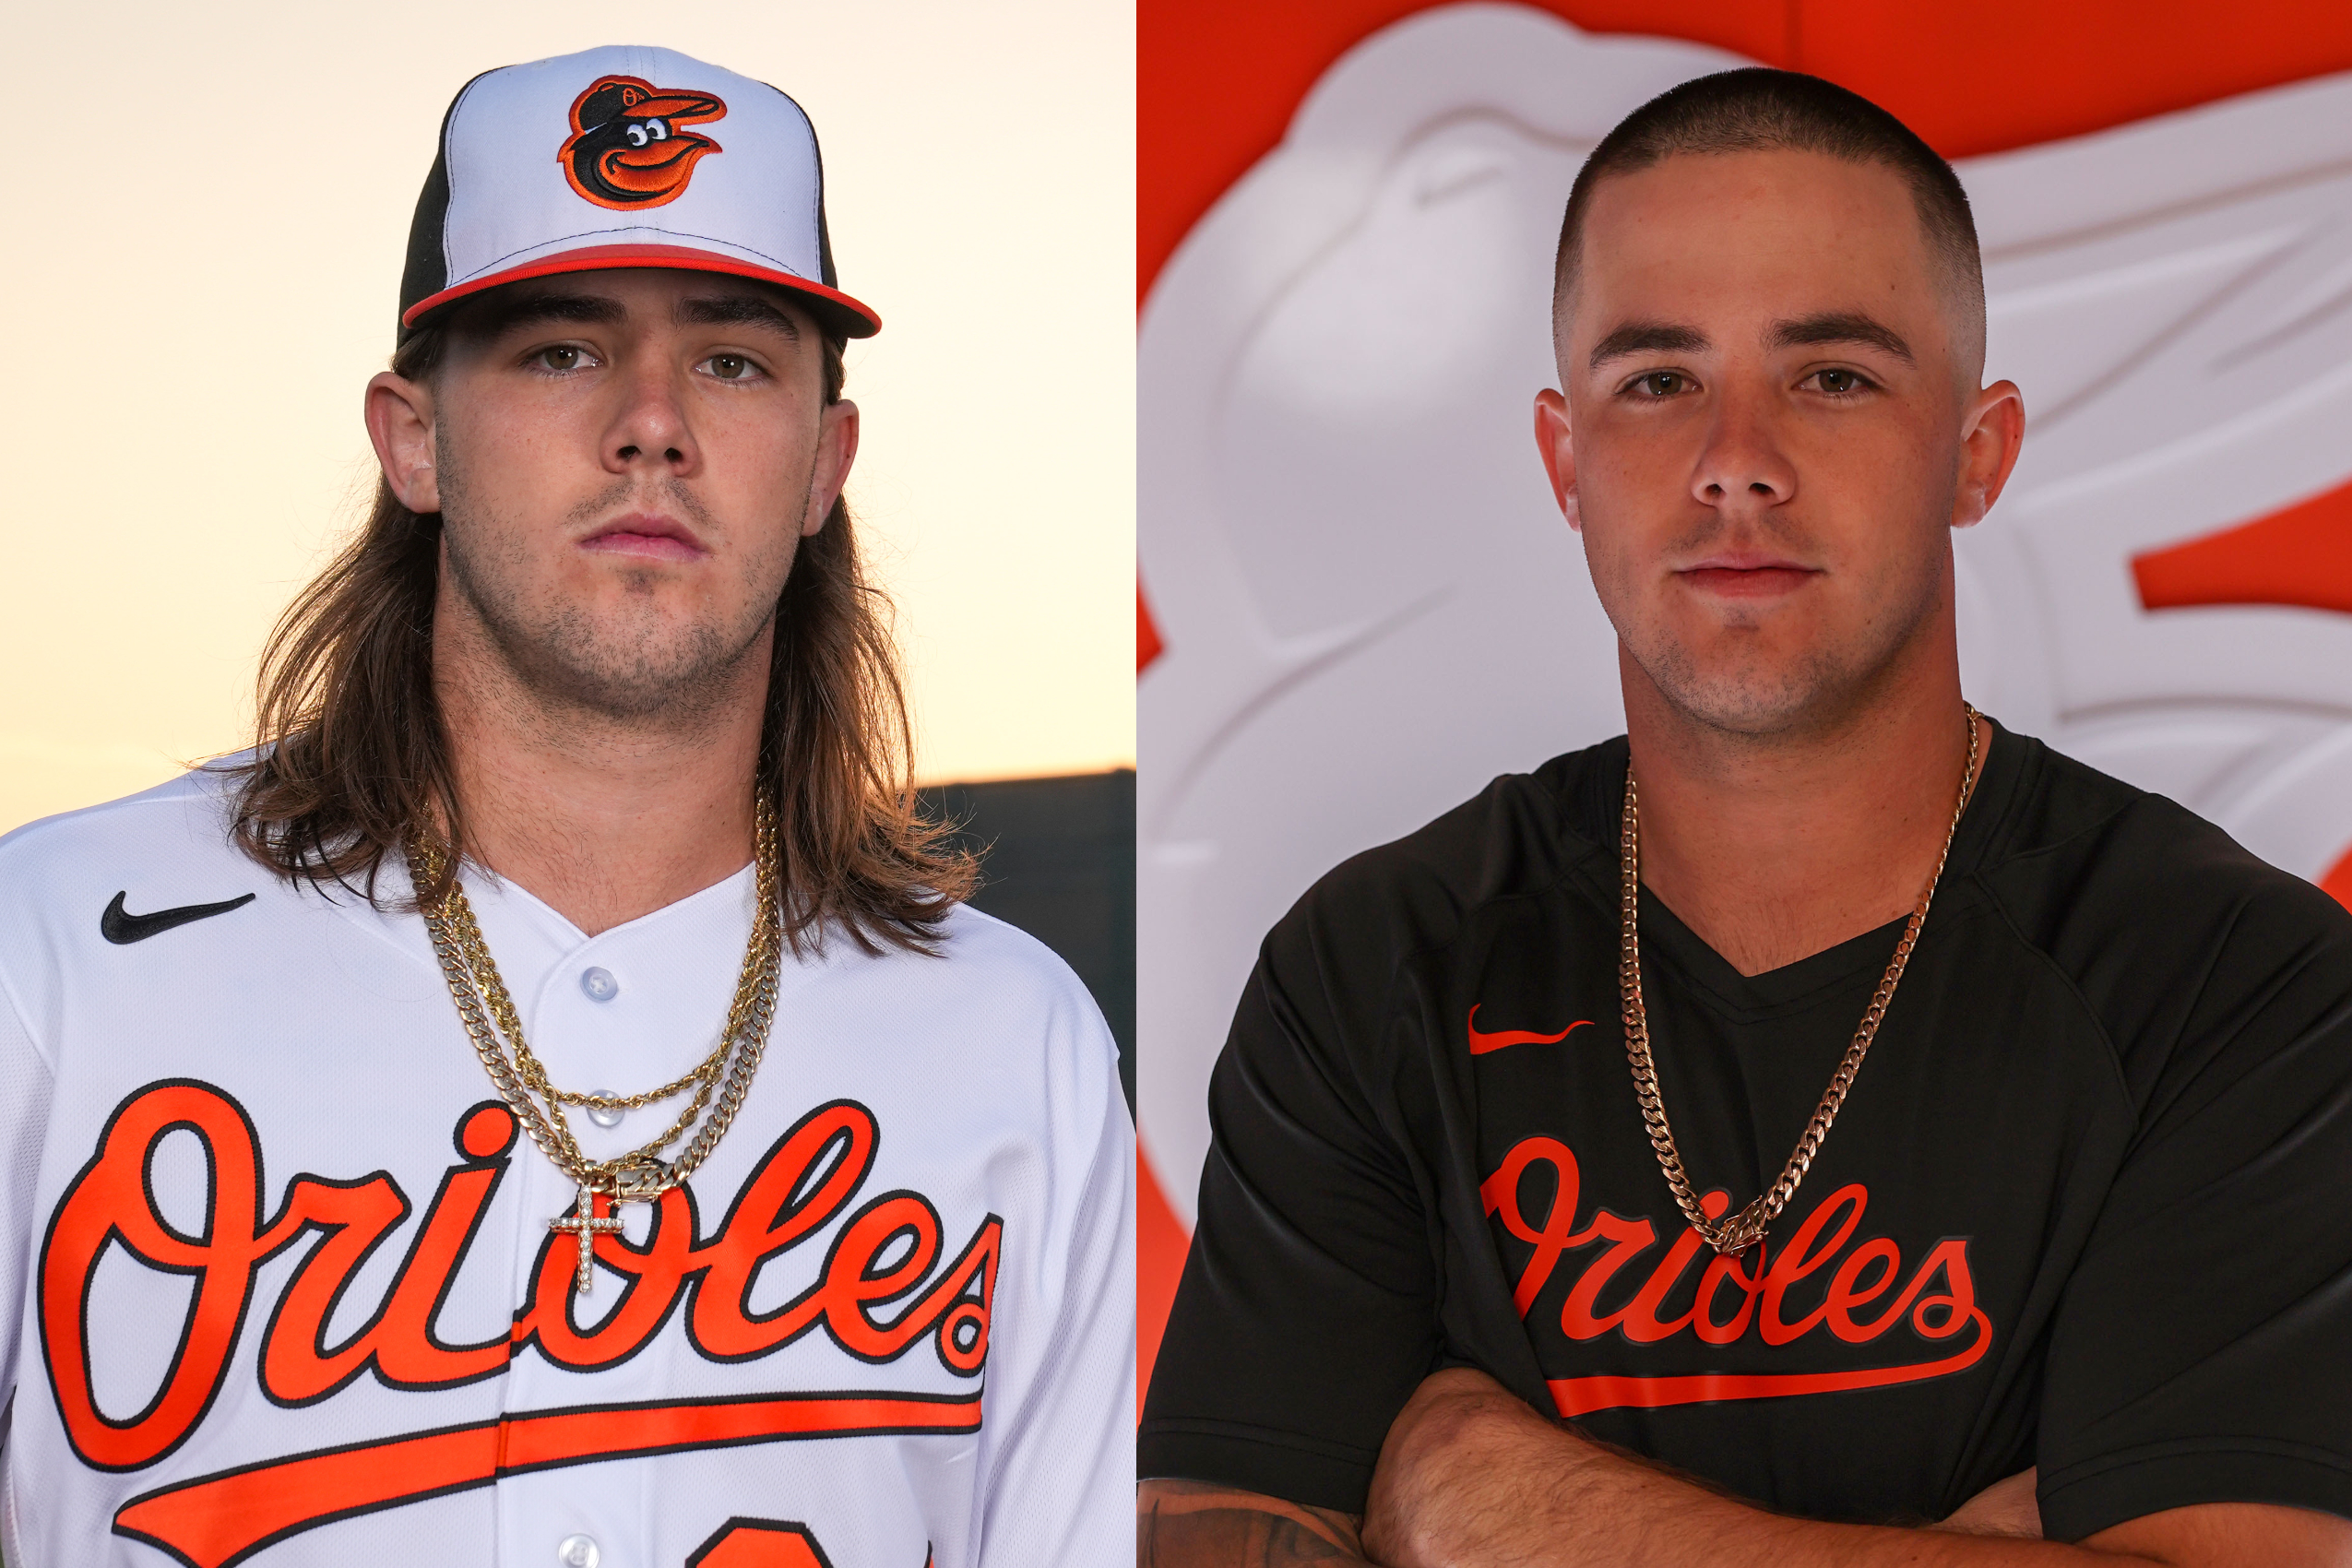 The Baltimore Orioles have a new jersey and a new look! Check out the